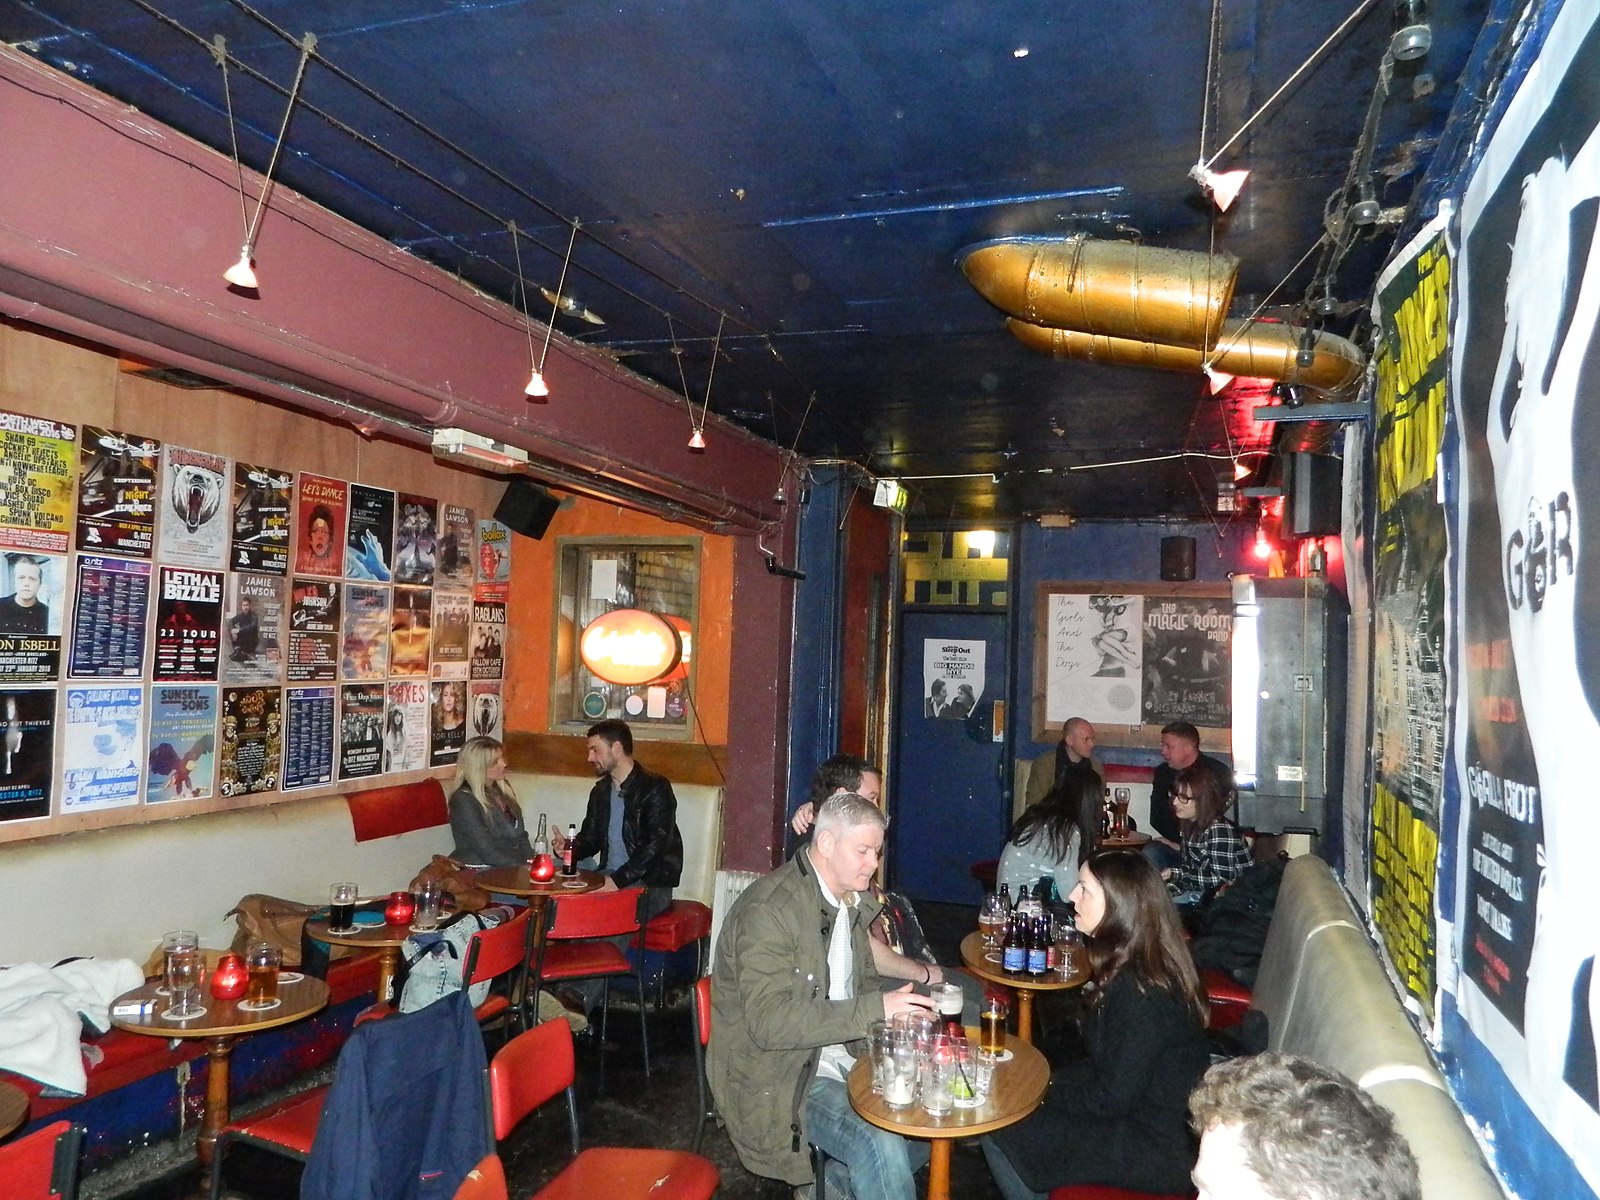 How a public toilet became a drinking den for Manchester musicians, The Manc